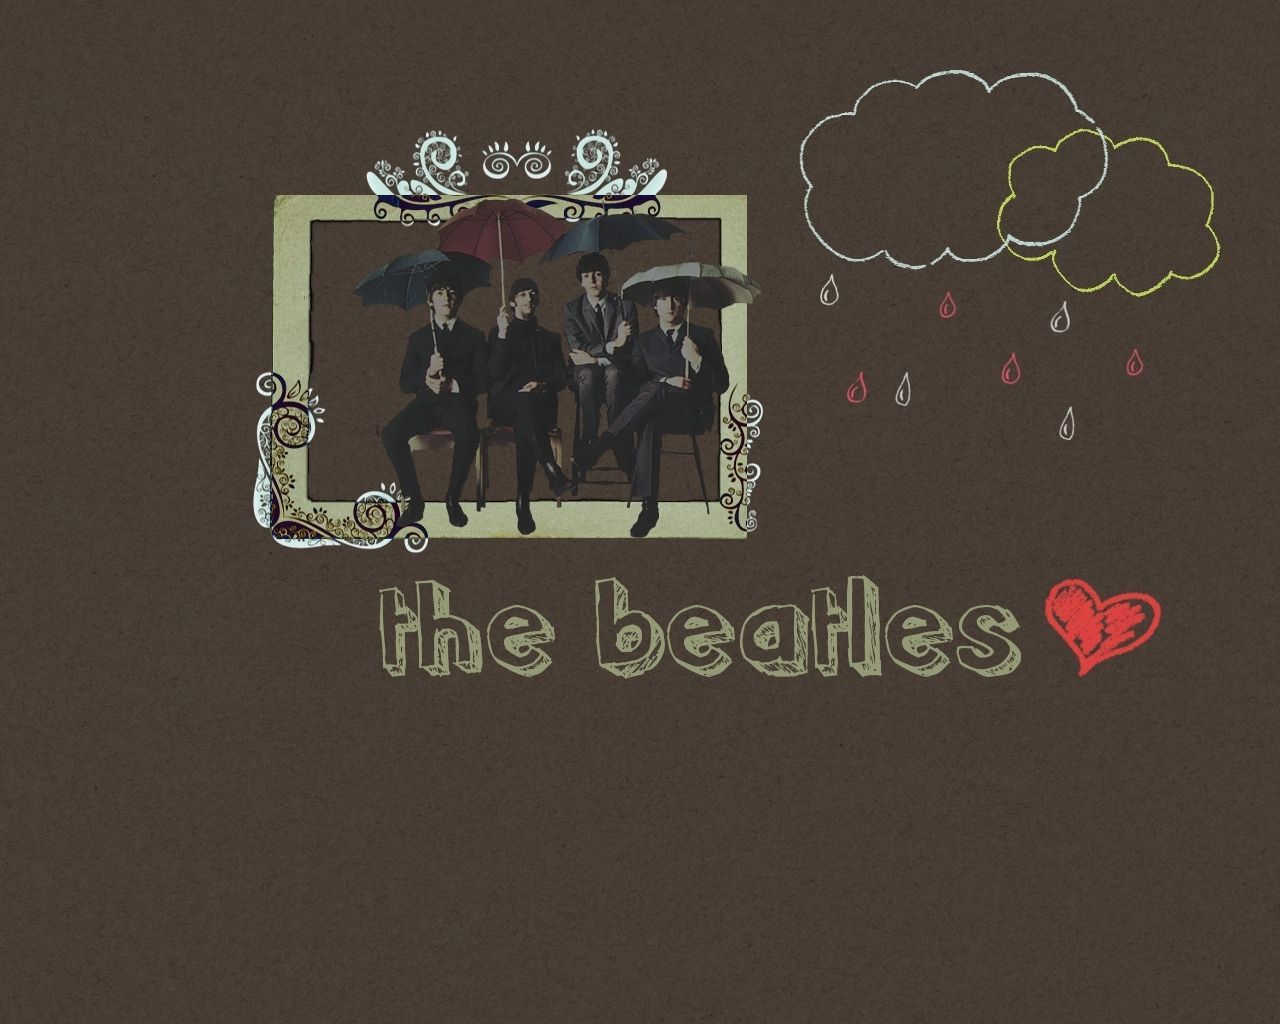 Gallery for - beatle wallpapers